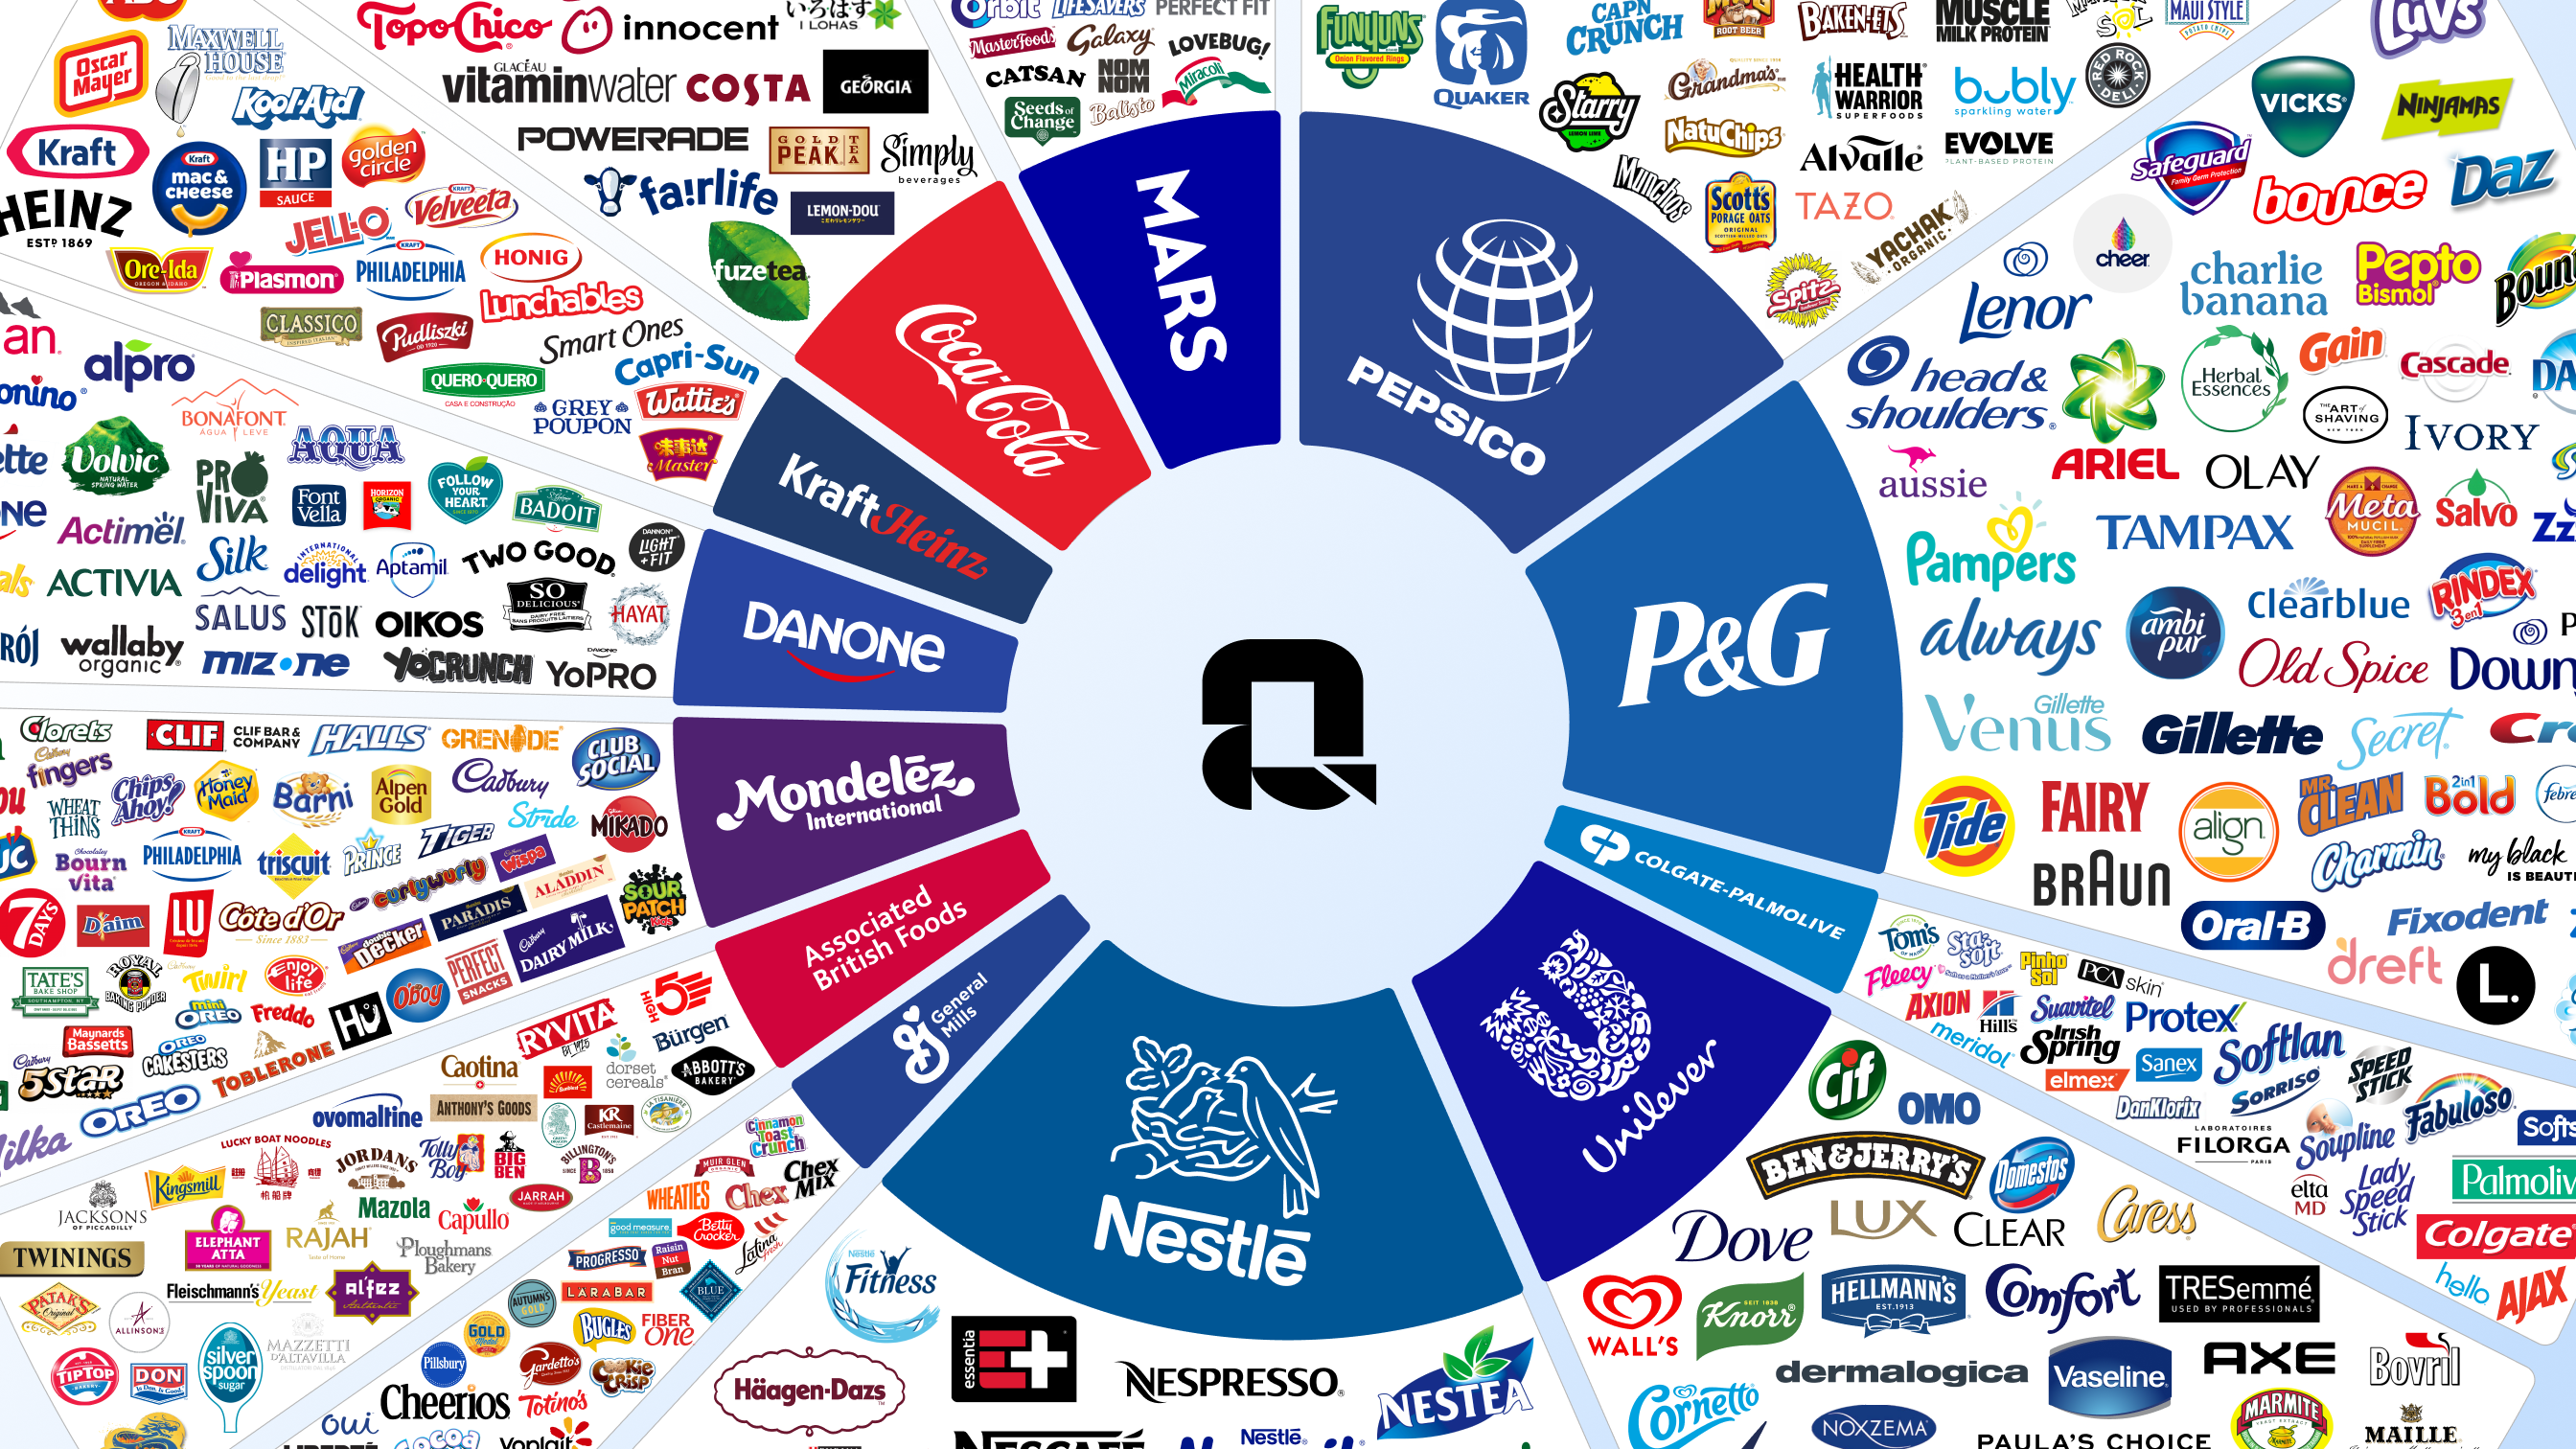 Infograph showing the biggest brands in the consumer goods sector, and their conglomerates